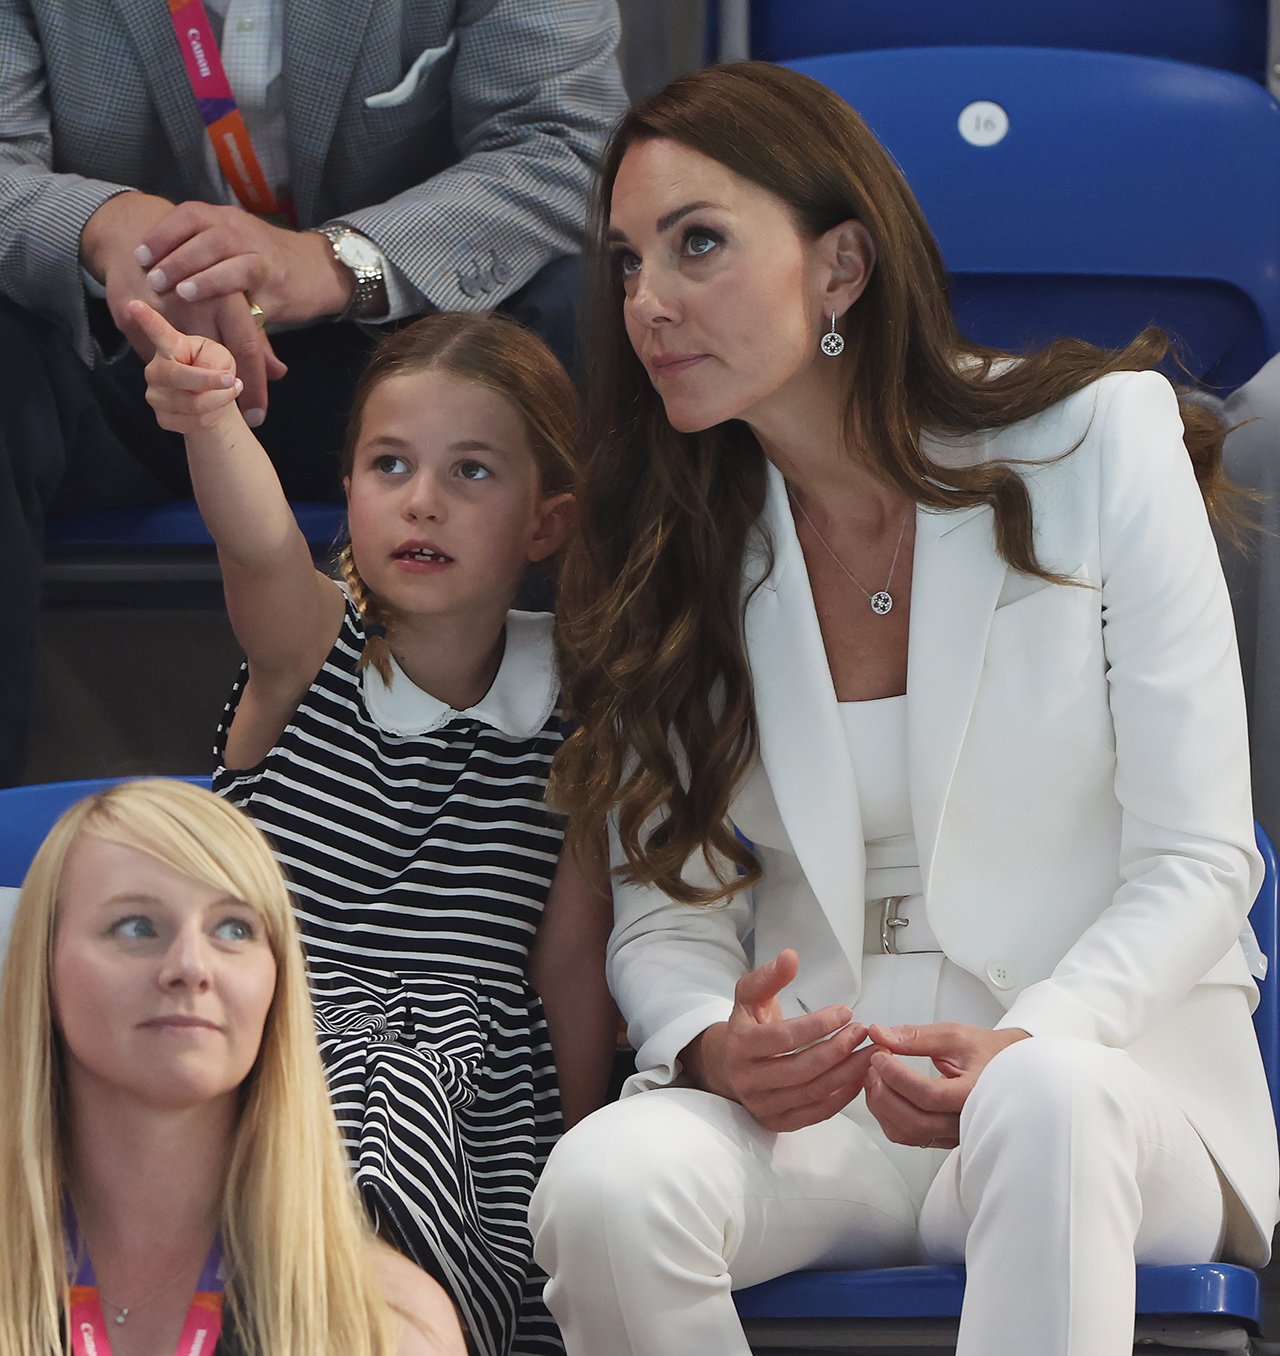 Princess Charlotte points something out to her mom Kate Middleton while in the stands at the Commonwealth Games